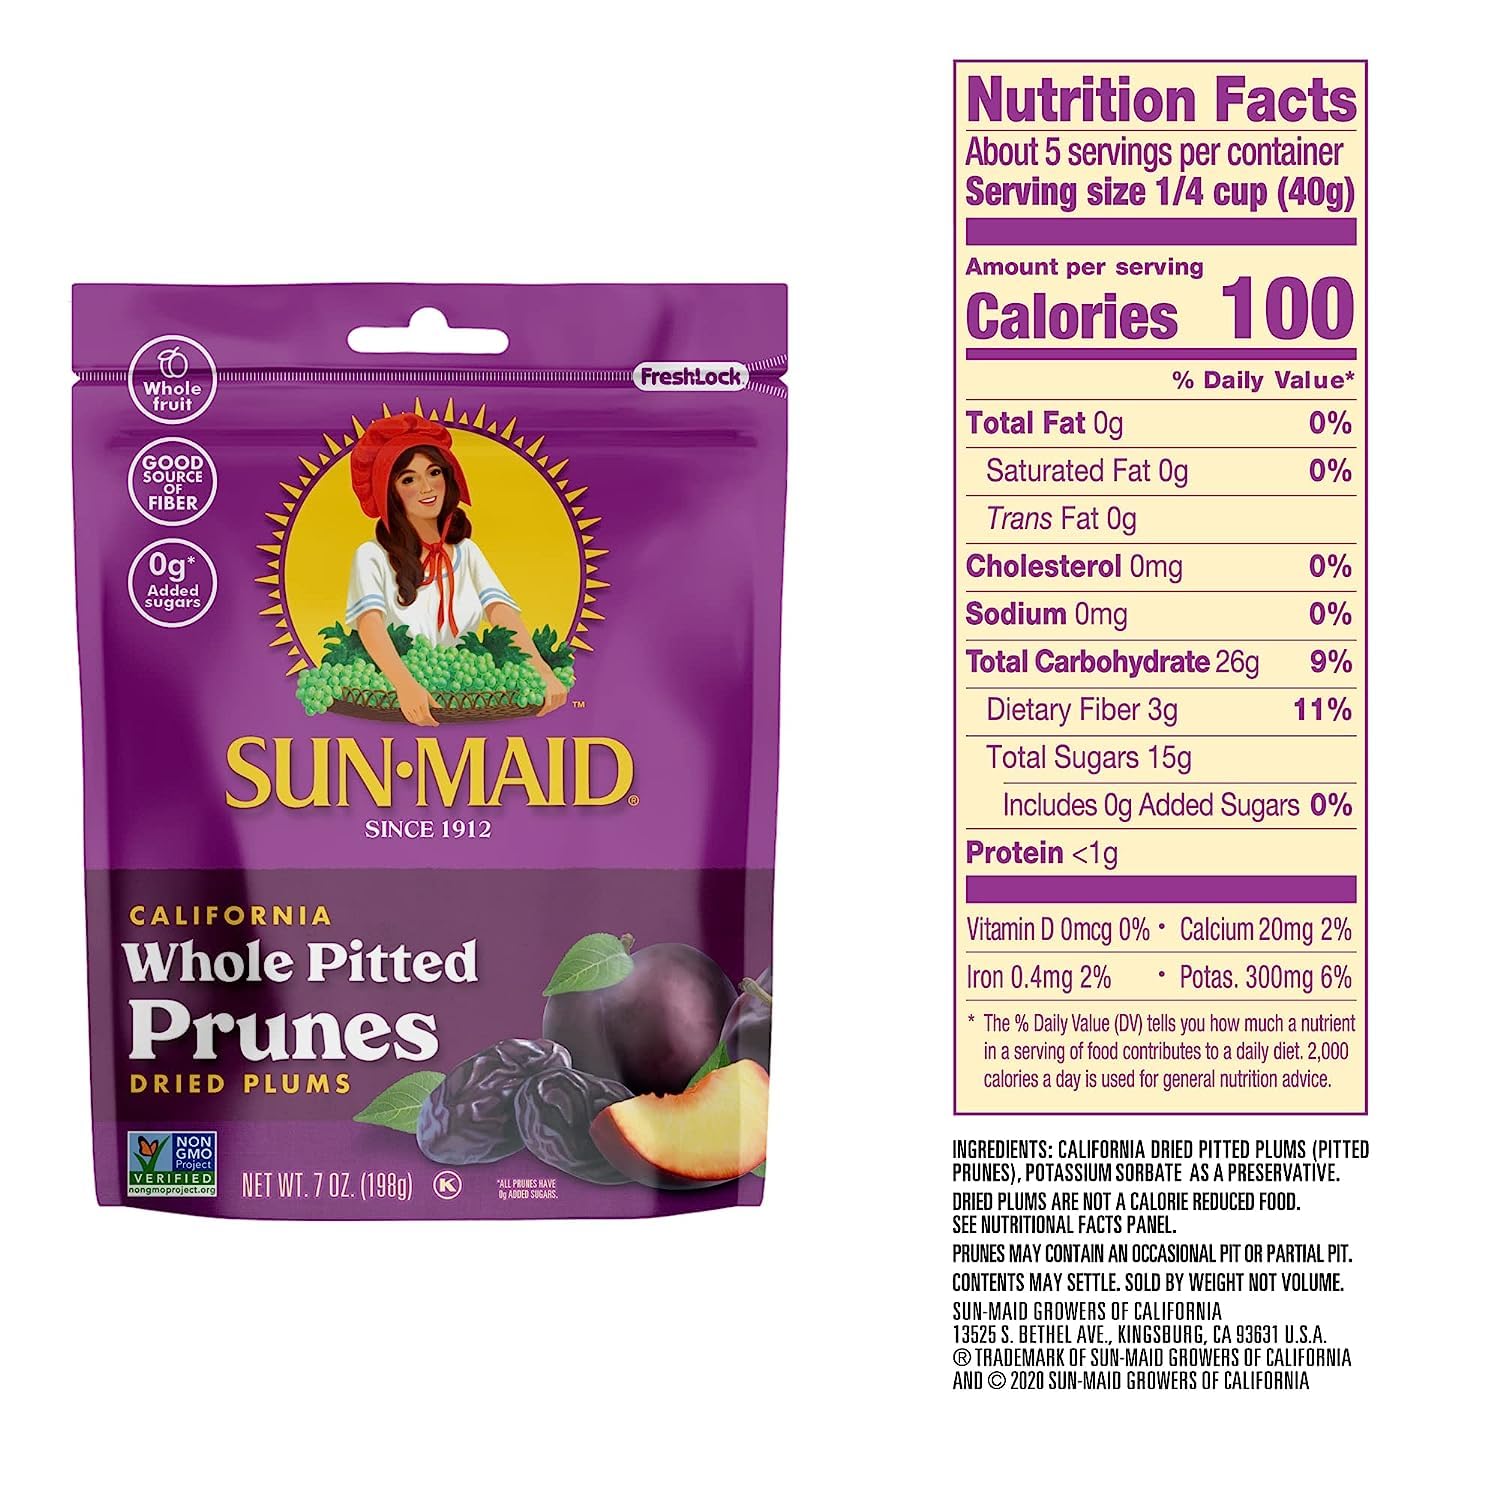 Sun-Maid California Sun-Dried Whole Pitted Prunes - (4 Pack) 7 oz Resealable Bag - Dried Plums - Dried Fruit Snack for Lunches, Snacks, and Natural Sweeteners : Grocery & Gourmet Food